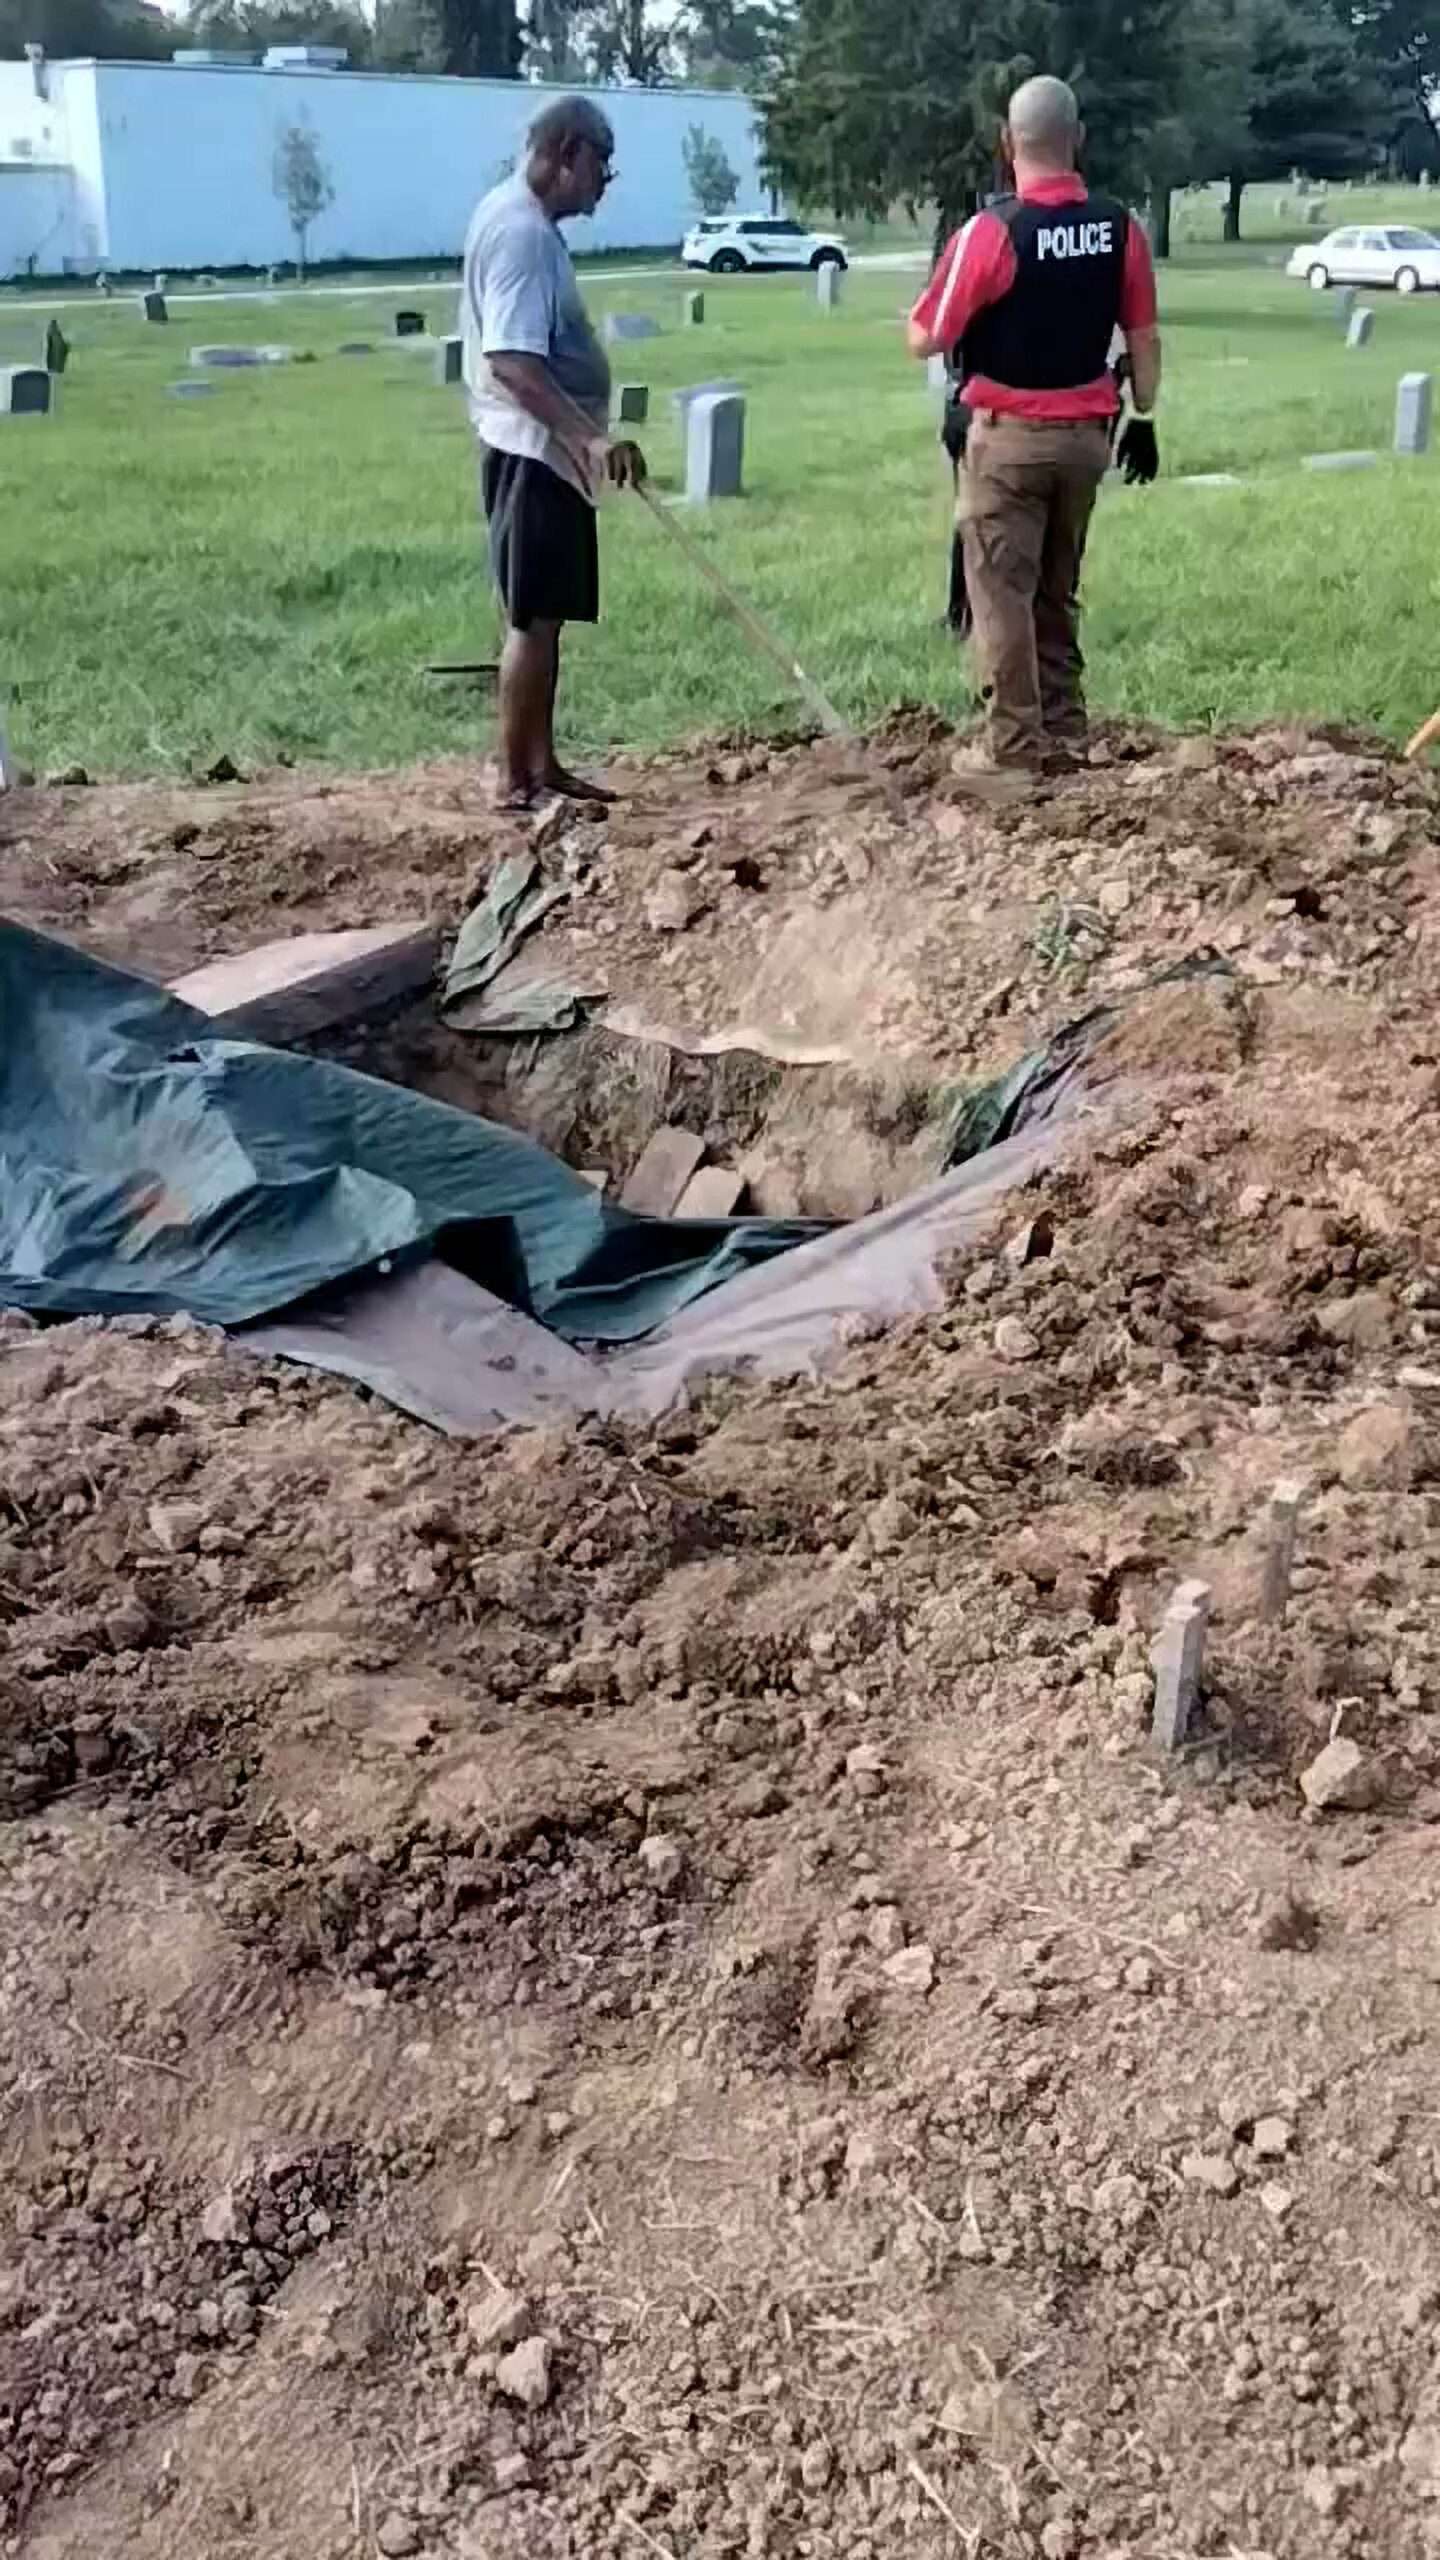 Men Busted Trying To Dig Up Grandmother’s Grave